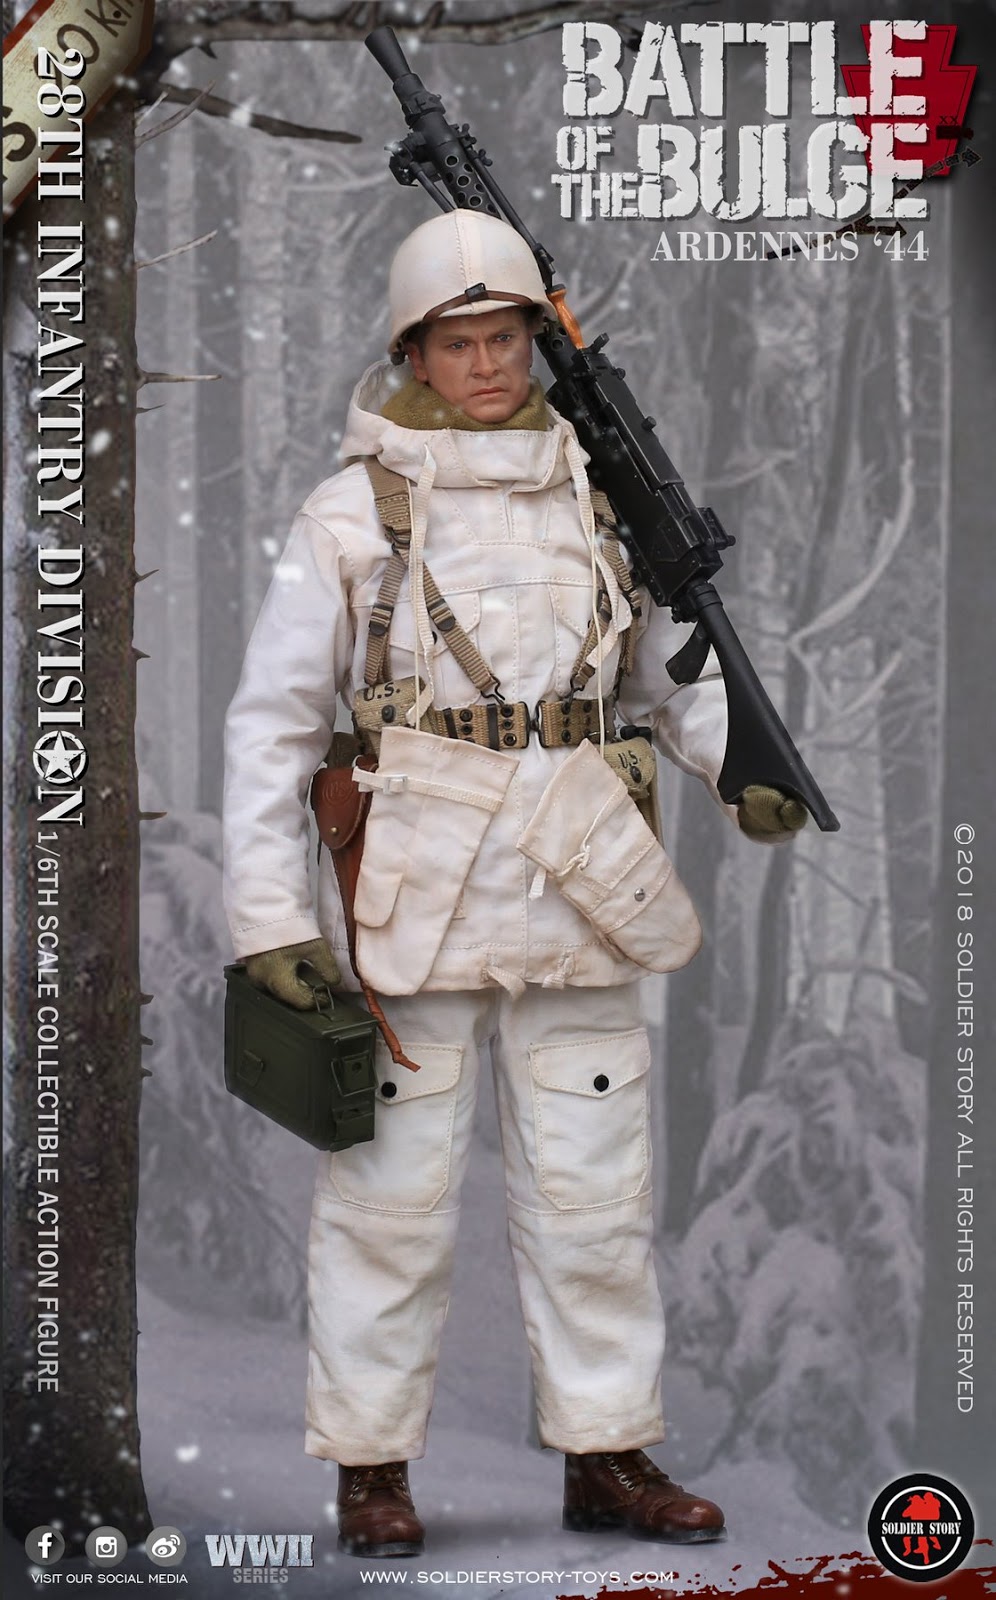 Ardennes - NEW PRODUCT: Soldier Story: 1/6 scale U.S. Army 28th Infantry Division Ardennes 1944 Bulge010